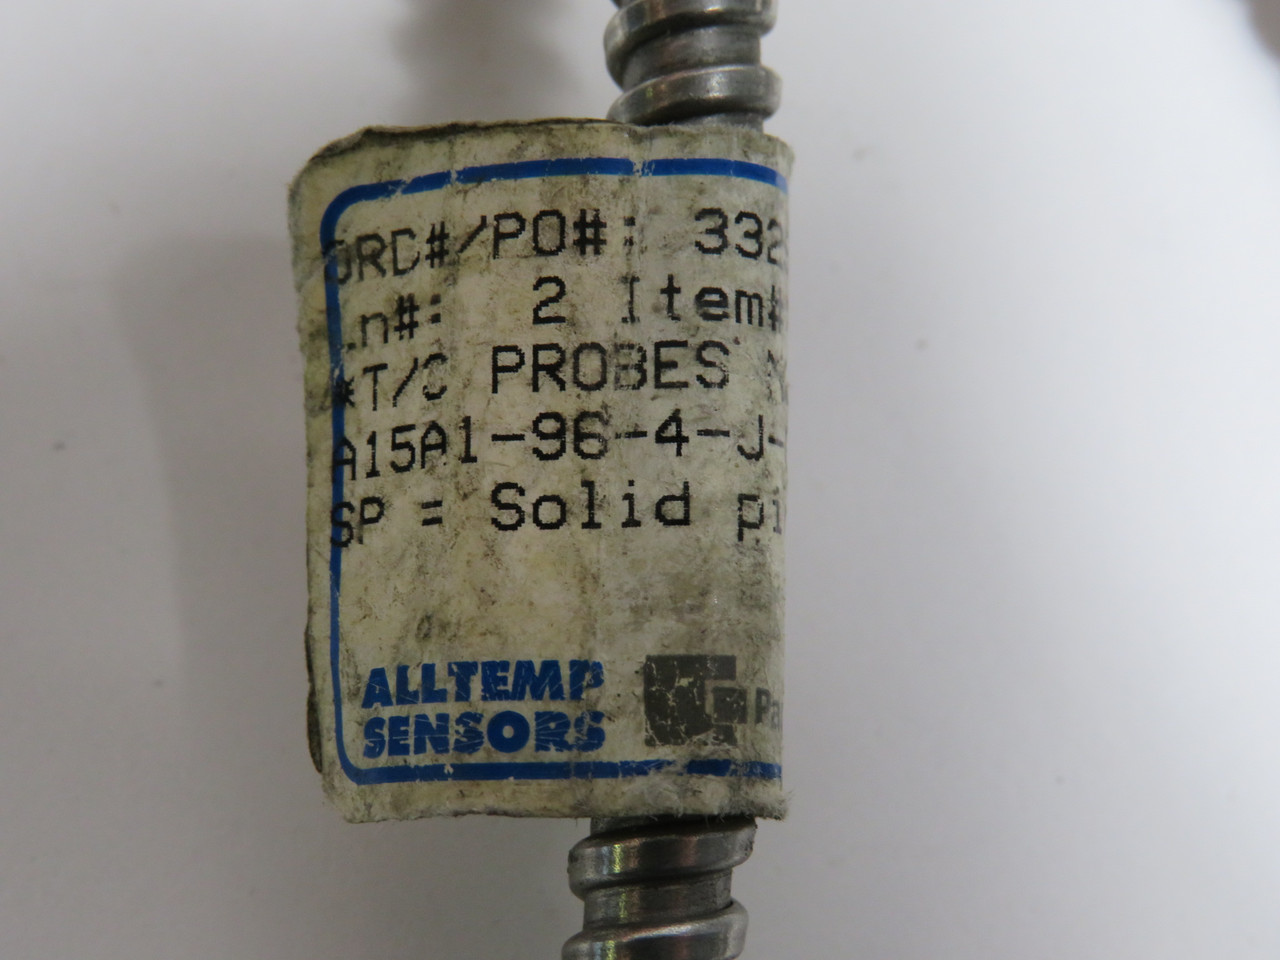 Wika A15A1-96-4-J-G-SP All-Temp Thermocouple USED